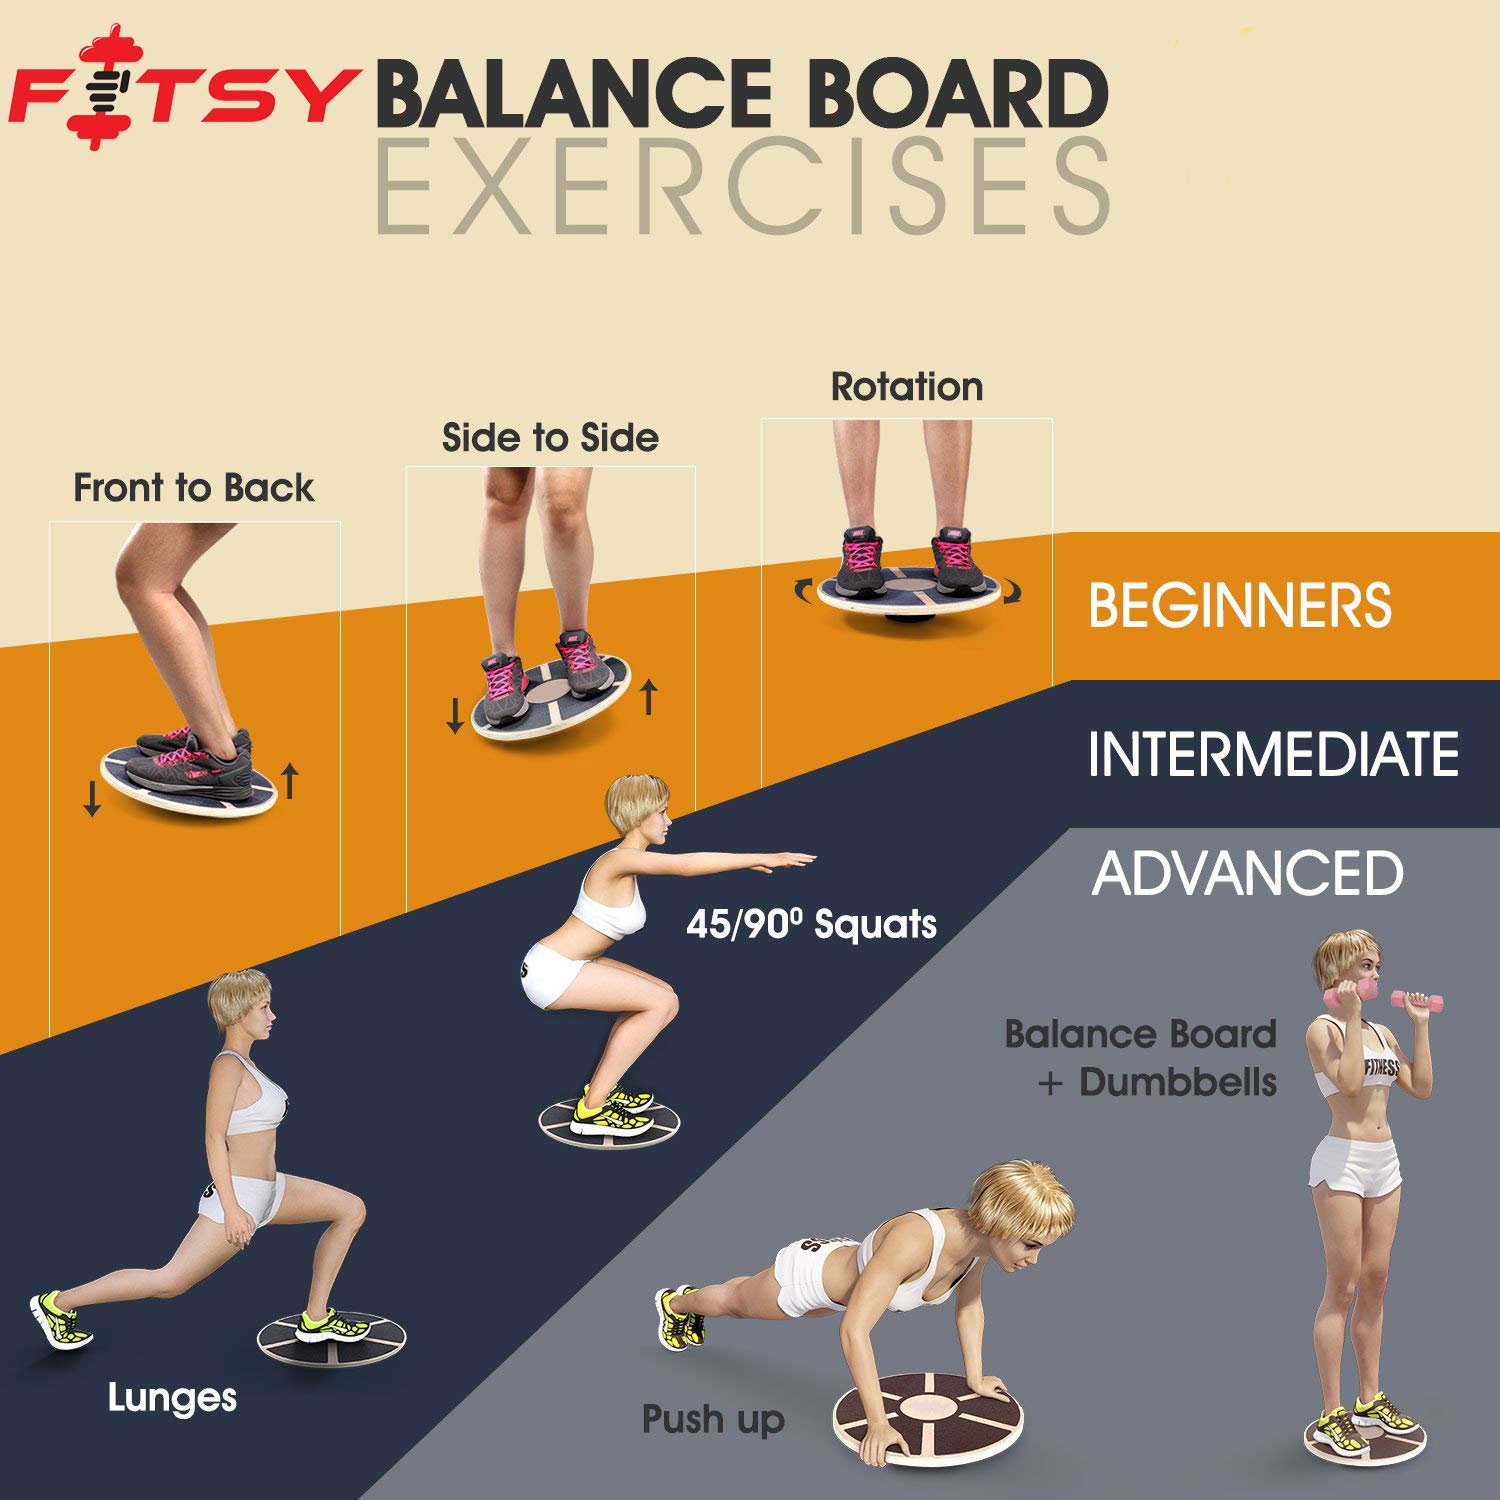 Simply Fit Board Exercises Cheap Factory, Save 70% | jlcatj.gob.mx